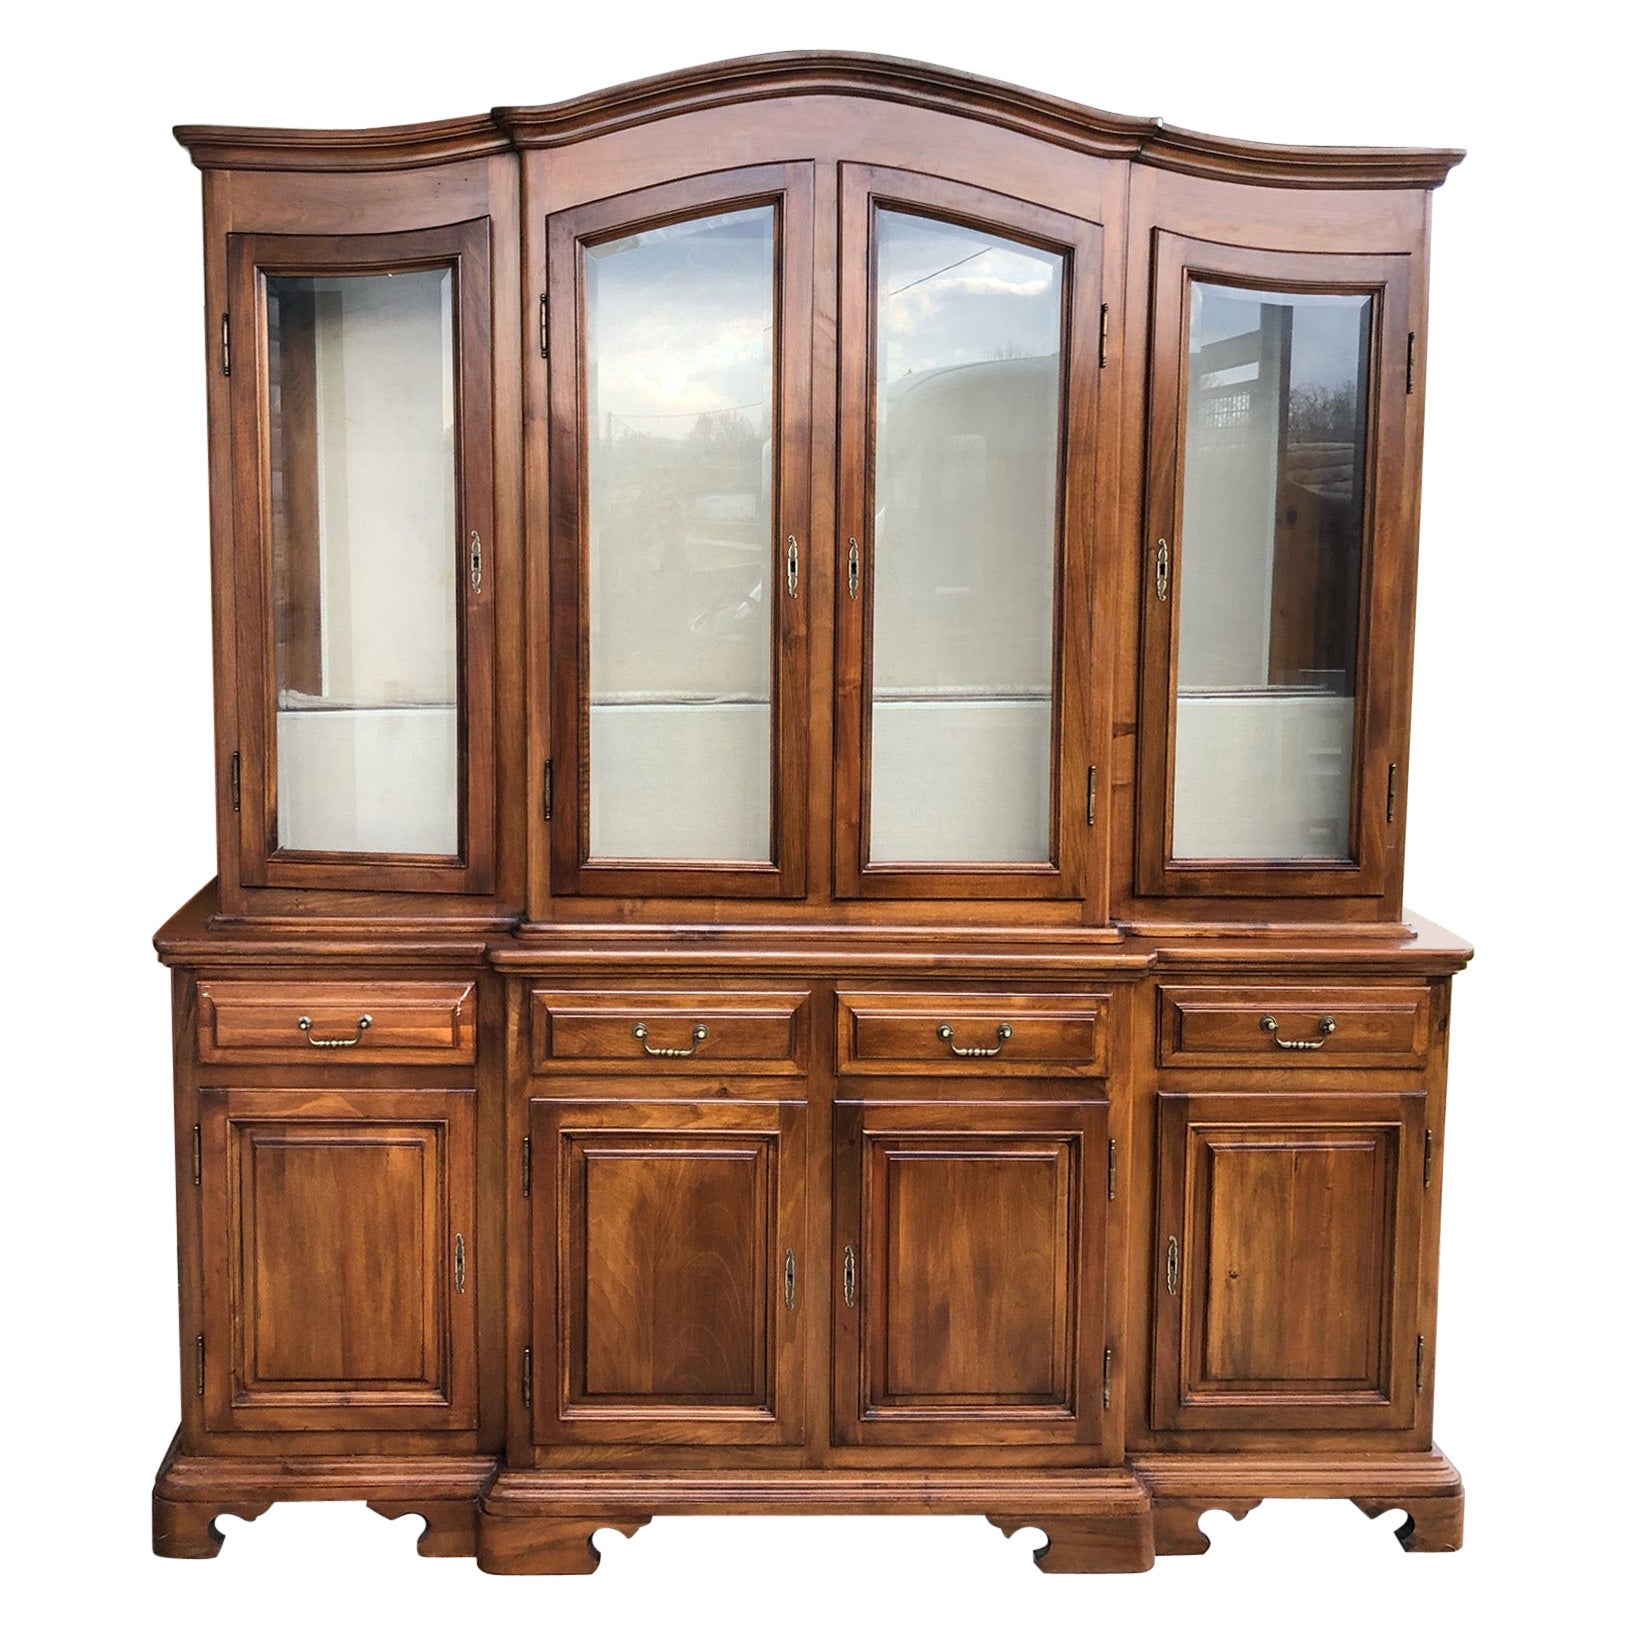 Italian Bookcase Showcase in Solid Walnut, Bevelled Glass and Drawers For Sale